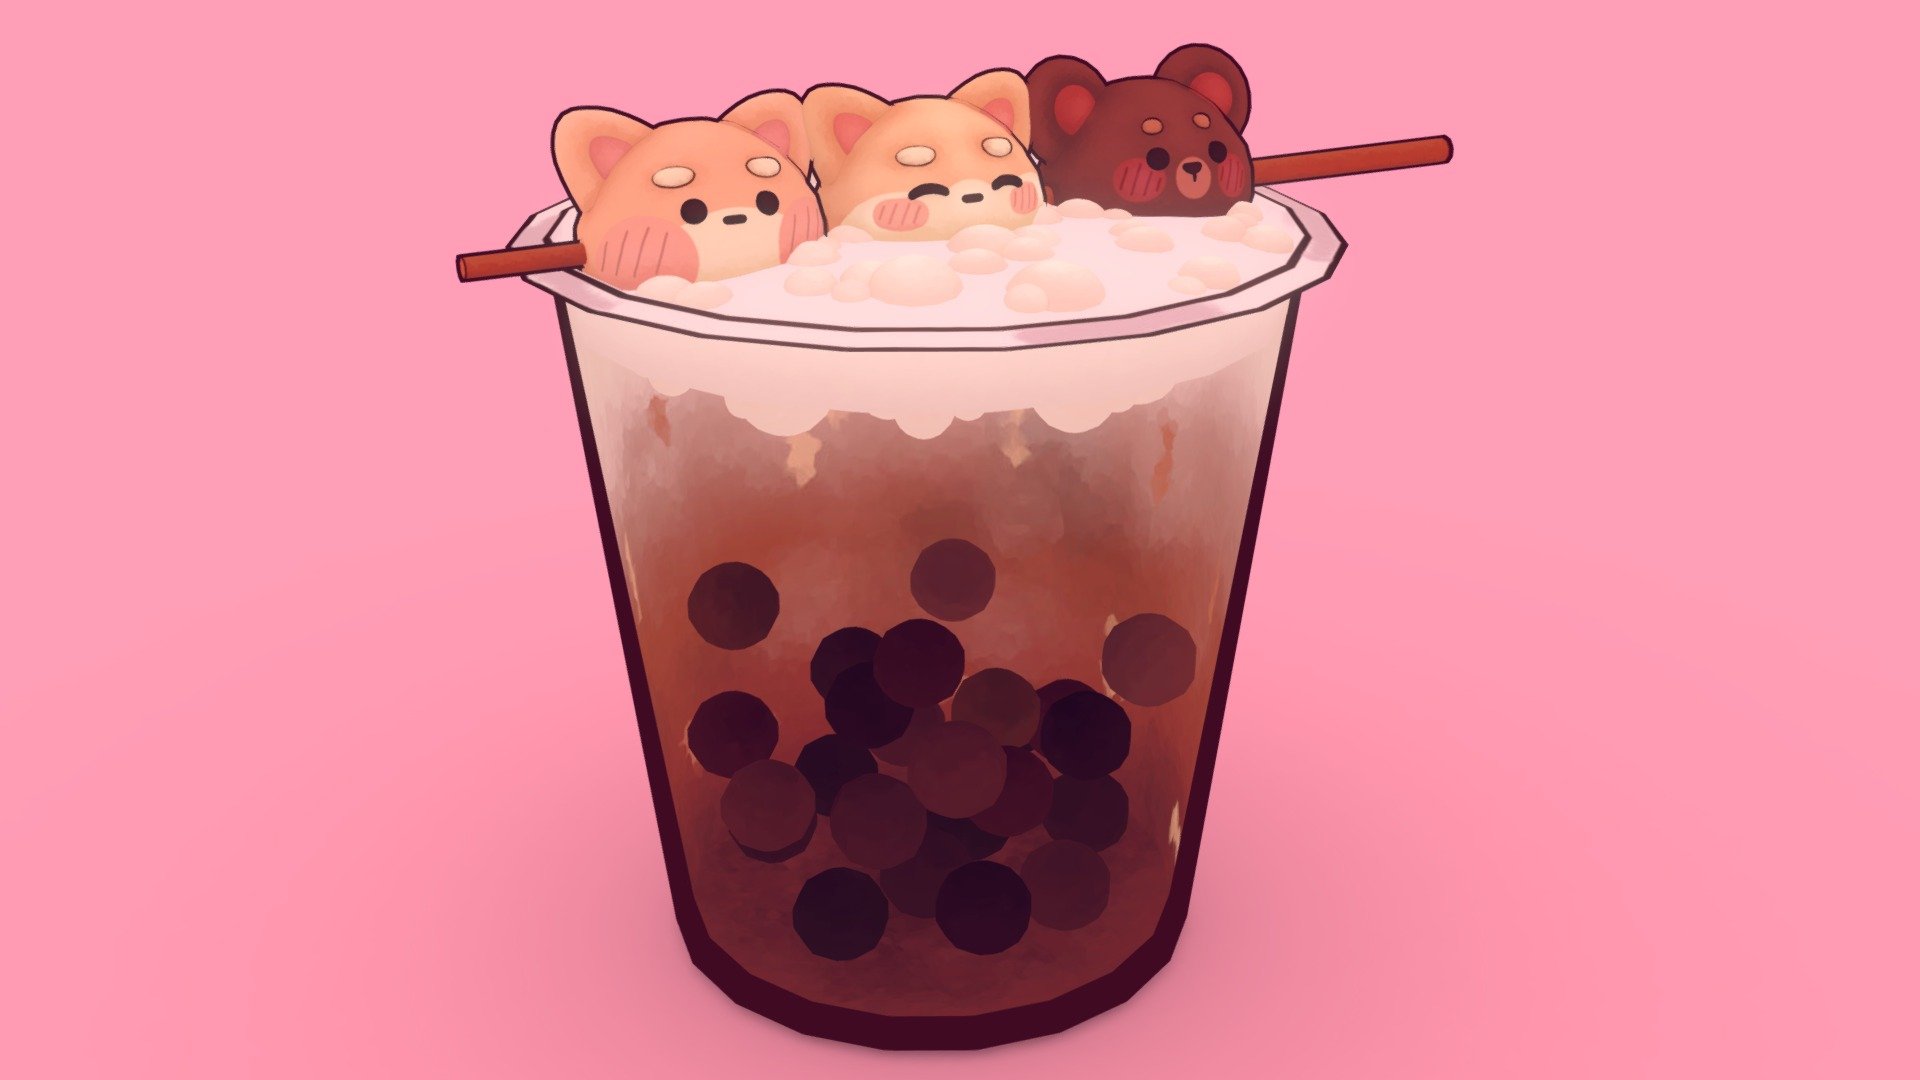 I had a lot of fun making this piece! ♥

The original art is made by the lovely: http://www.instagram.com/pencil.paw  |  http://twitter.com/pawpencil

Thank you for allowing me to create your art in 3D! ♥ - Cute boba tea - 3D model by Kiiba (@keebie) 3d model